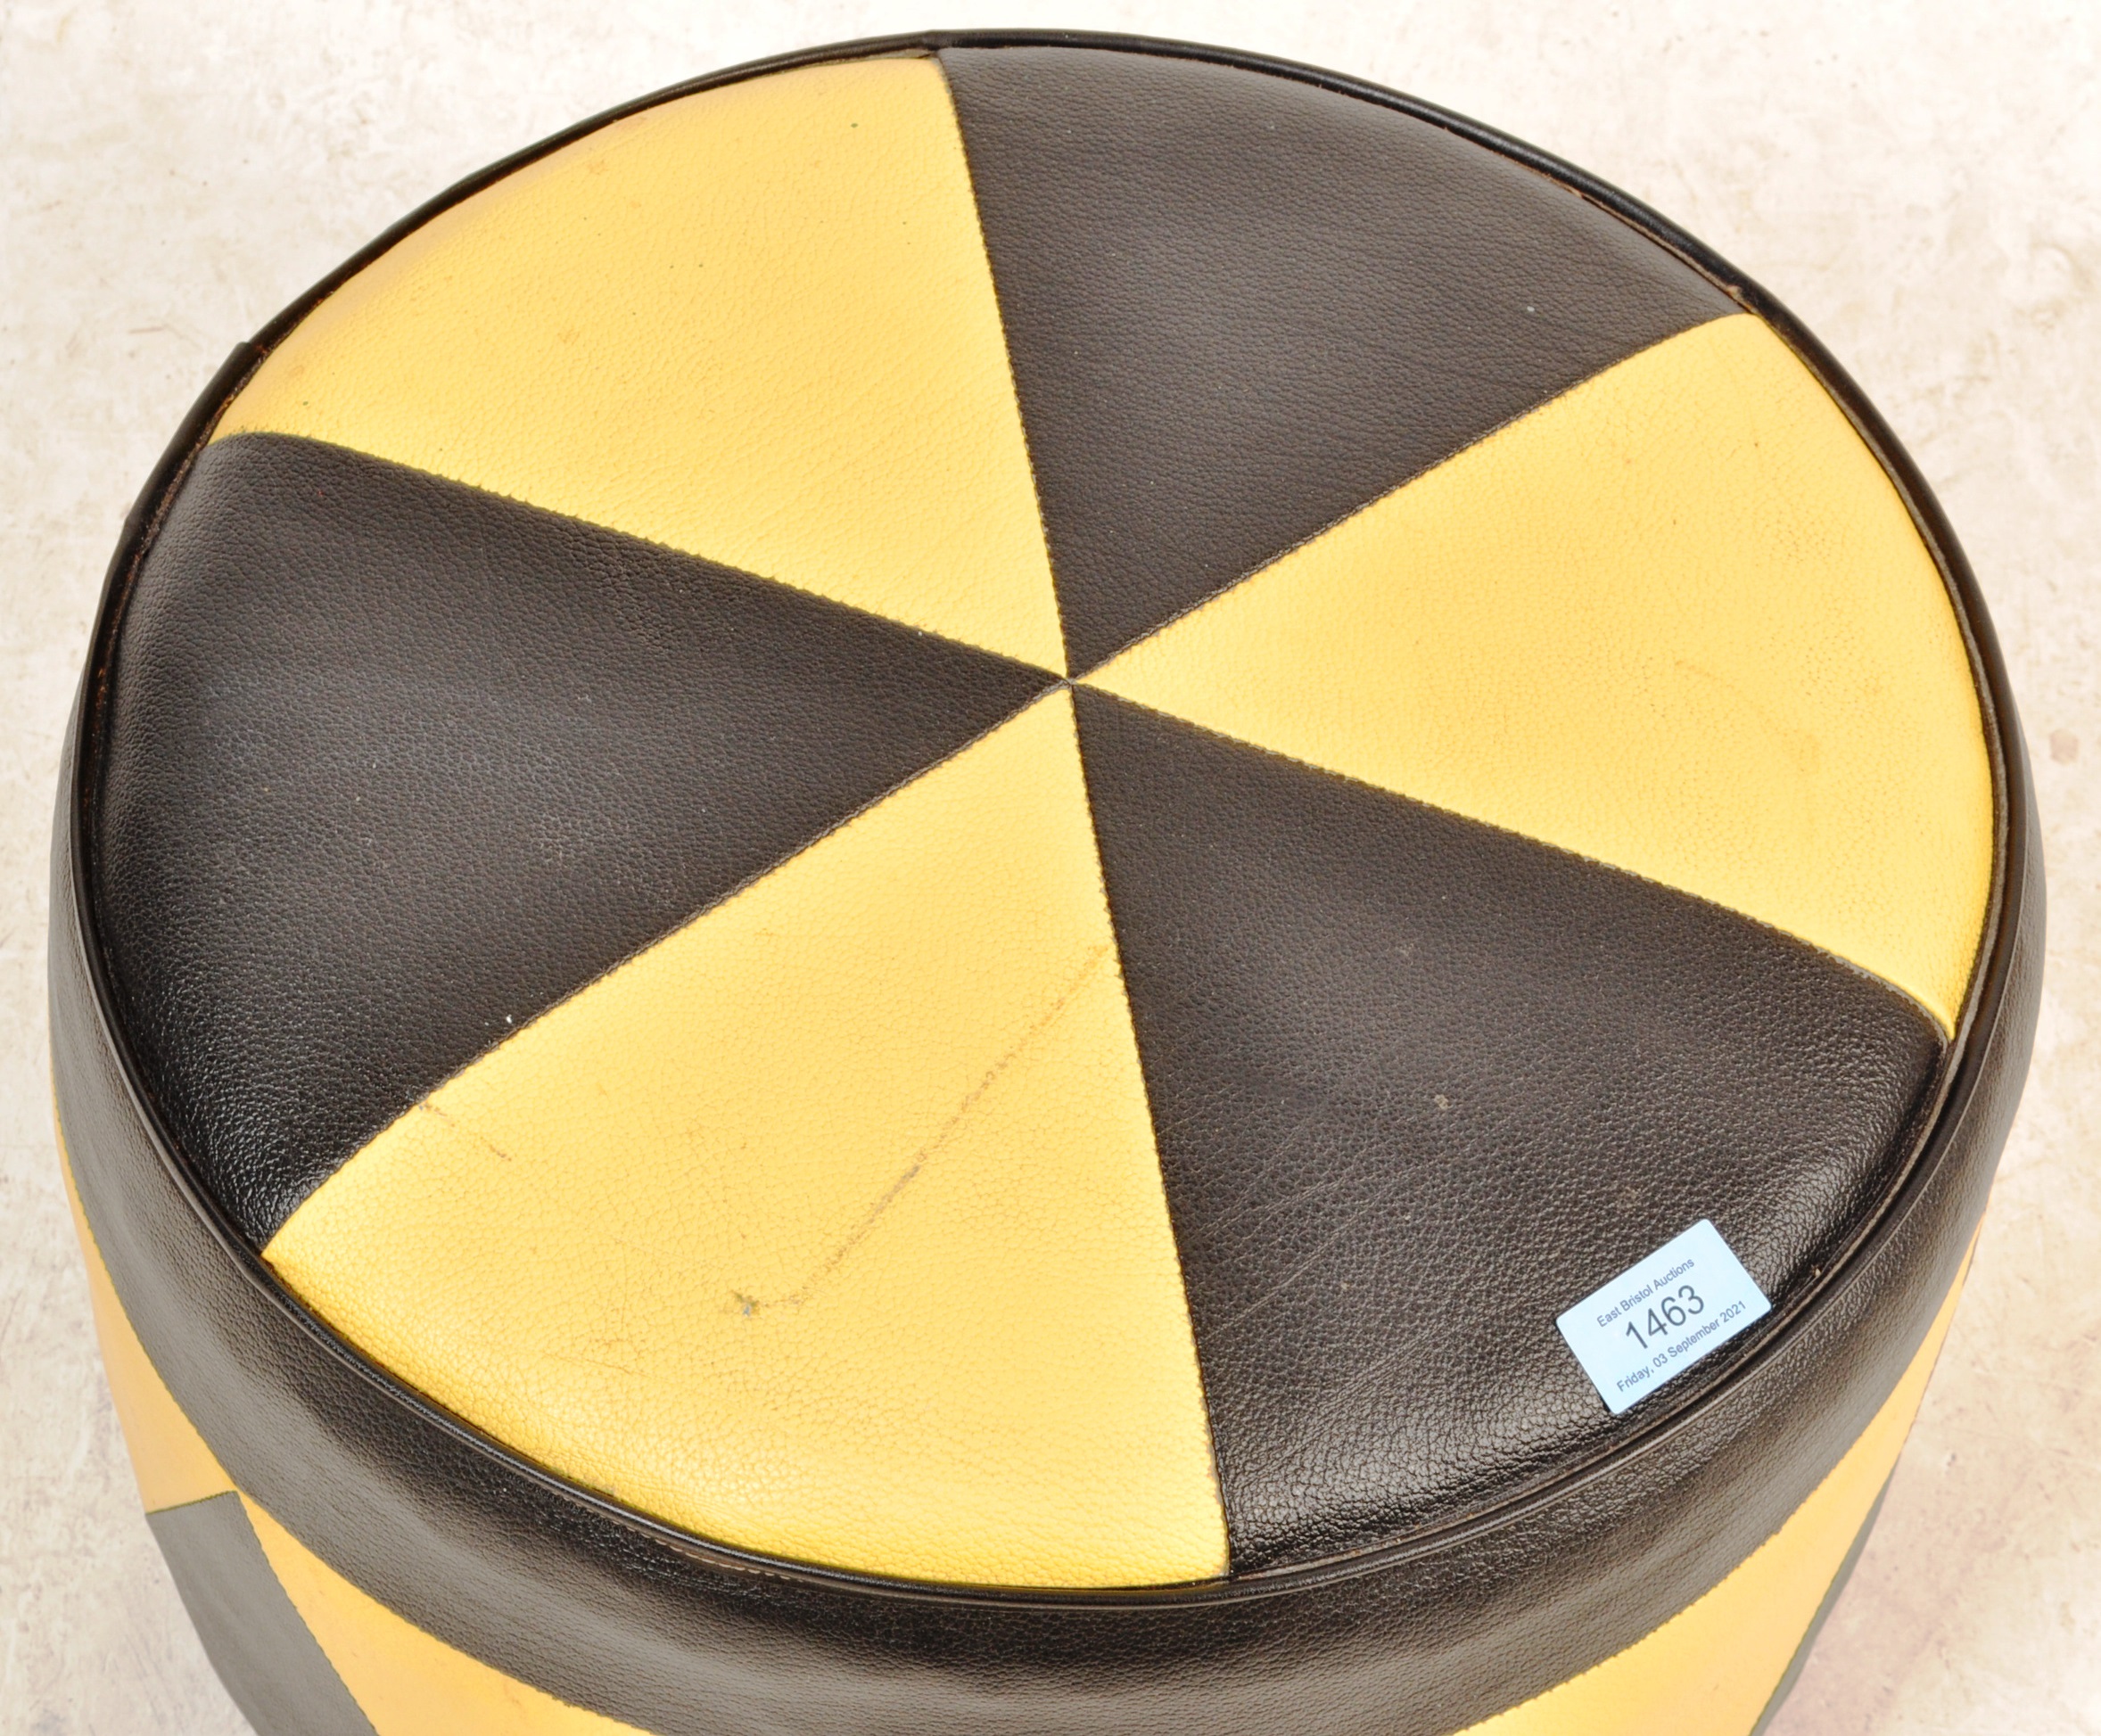 RETRO VINTAGE CIRCA 1970S BLACK AND YELLOW LEATHER FOOTSTOOL - Image 2 of 3